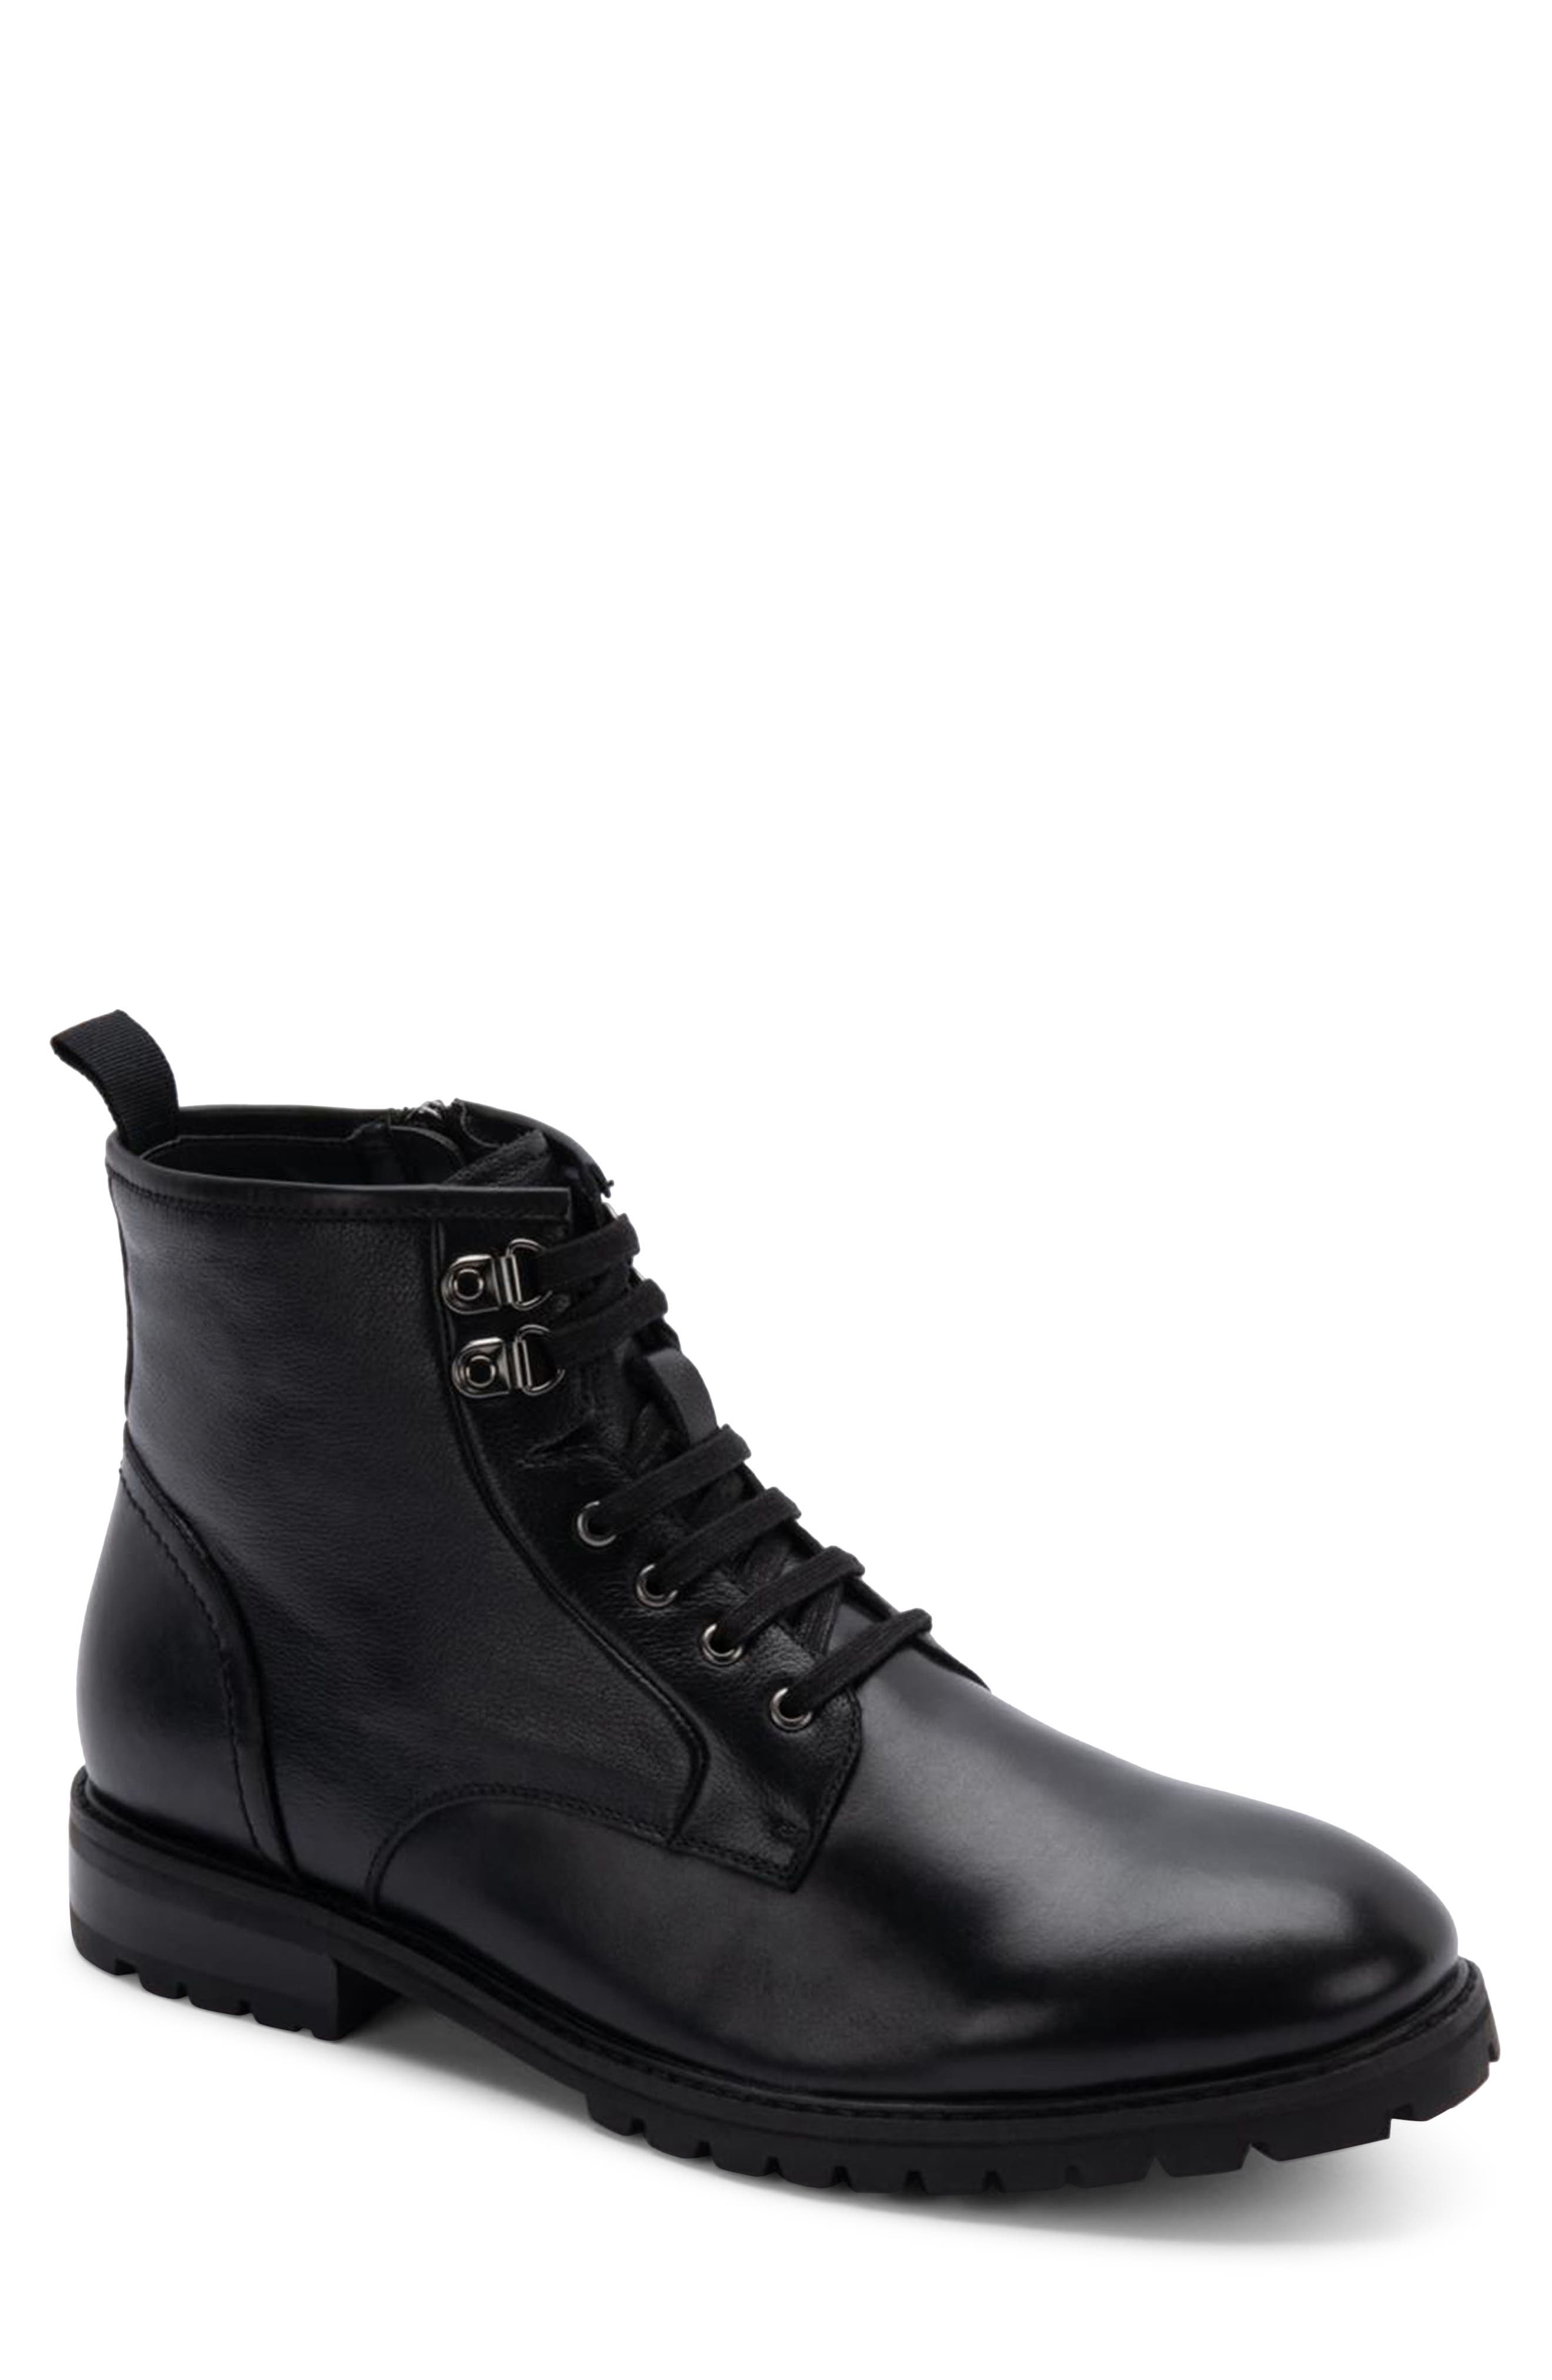 black and white boots mens